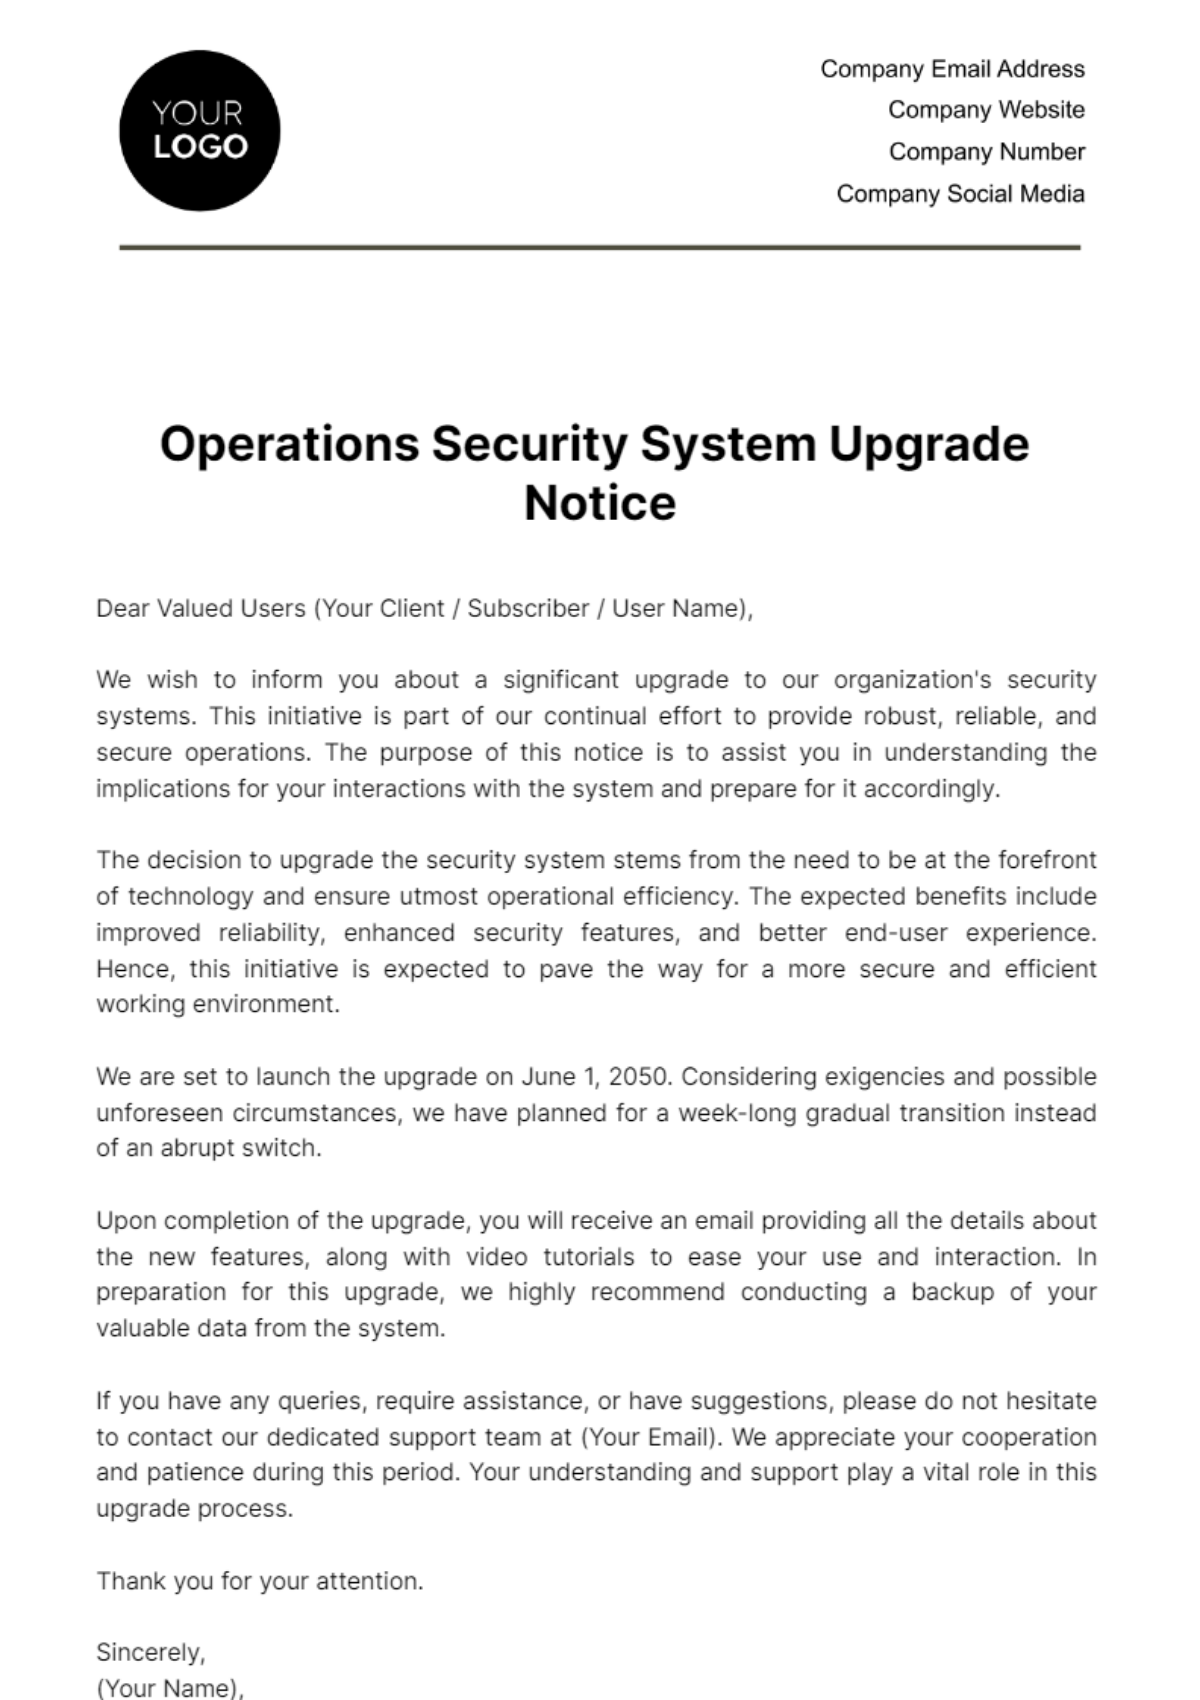 Operations Security System Upgrade Notice Template